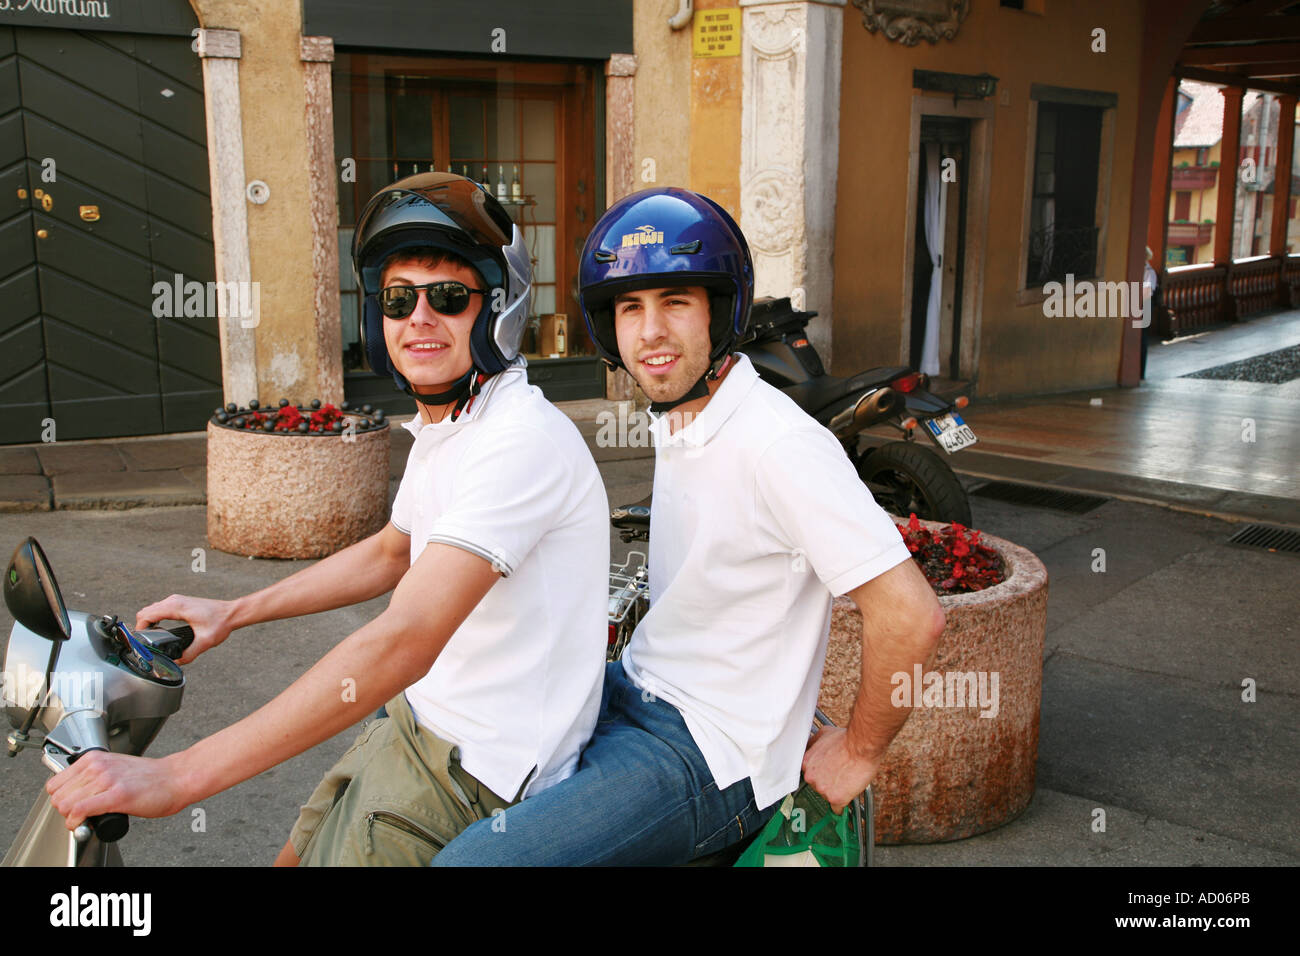 Two young men on a moped in Italy Stock Photo